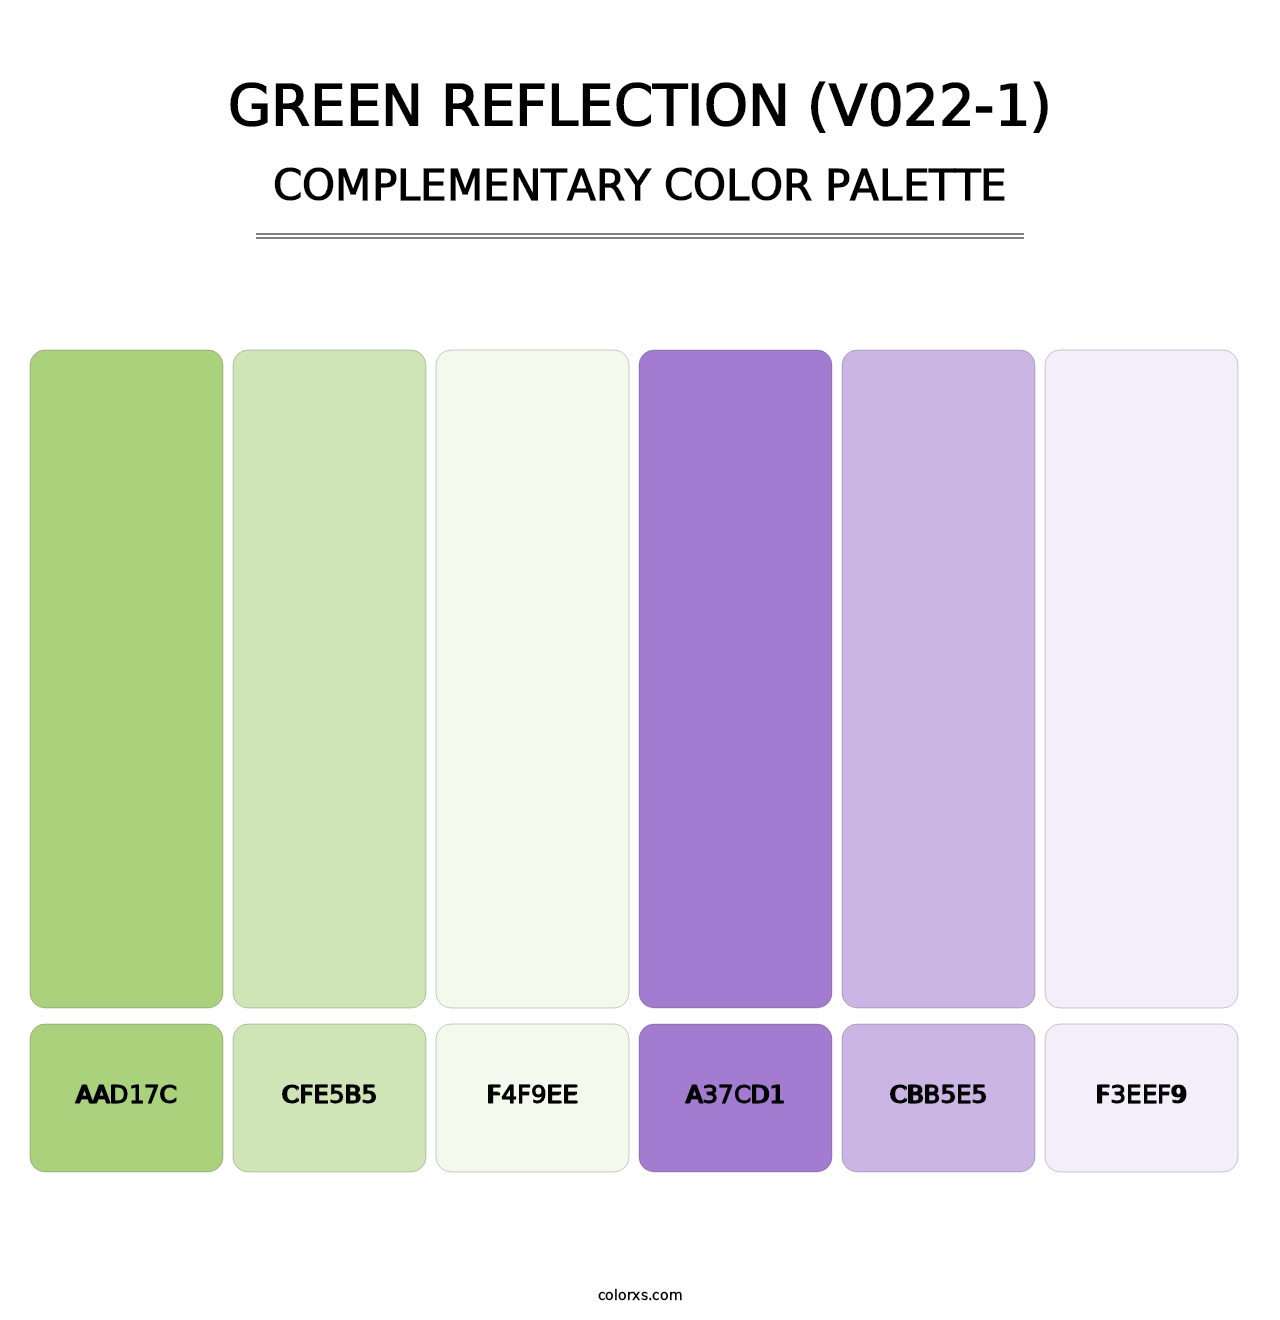 Green Reflection (V022-1) - Complementary Color Palette